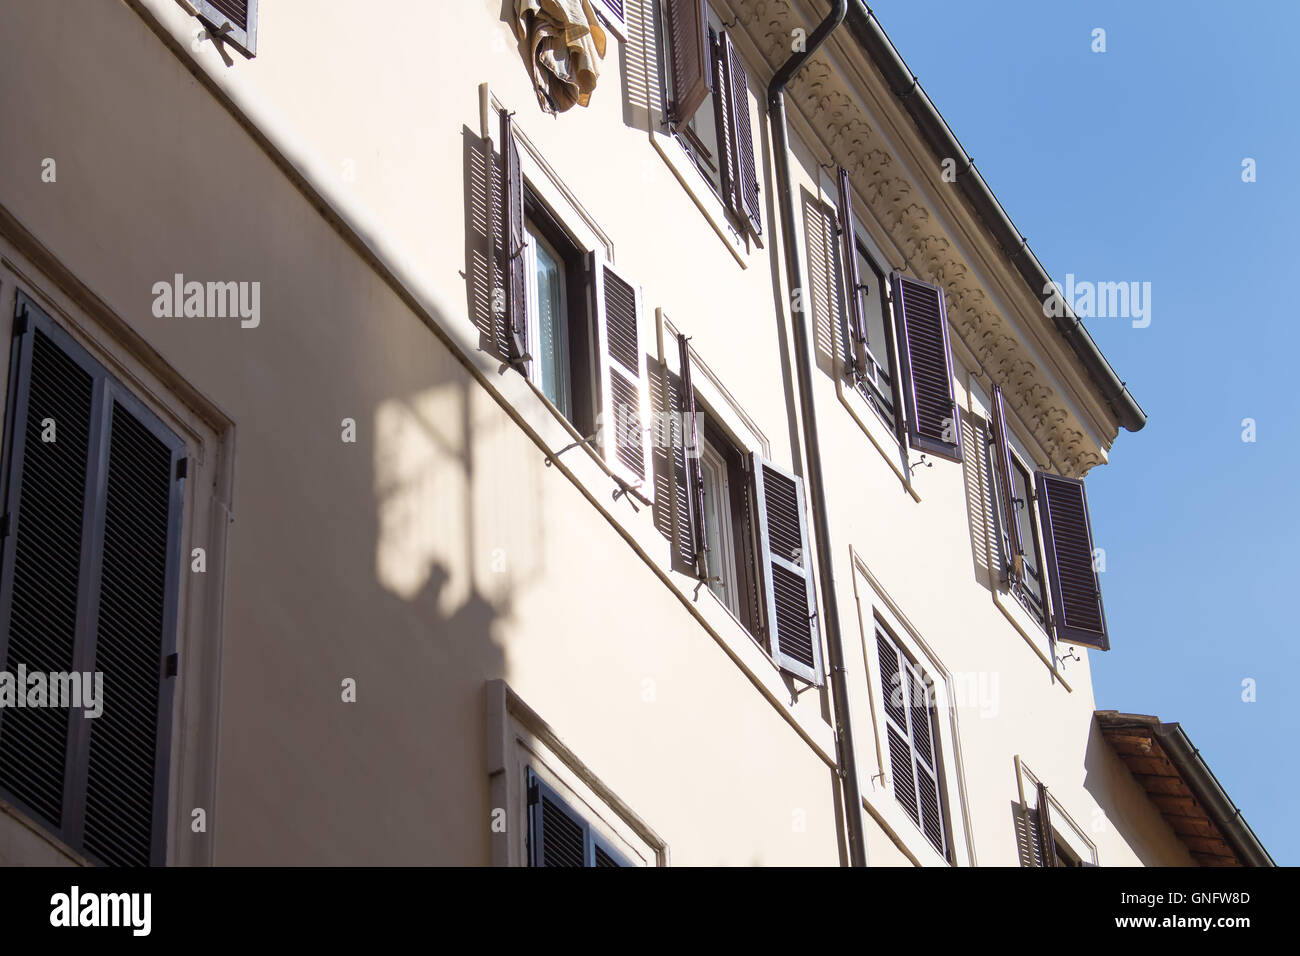 Detail of the roman residential house with enlightened shutters of the windows. Bright blue sky in the background. Stock Photo